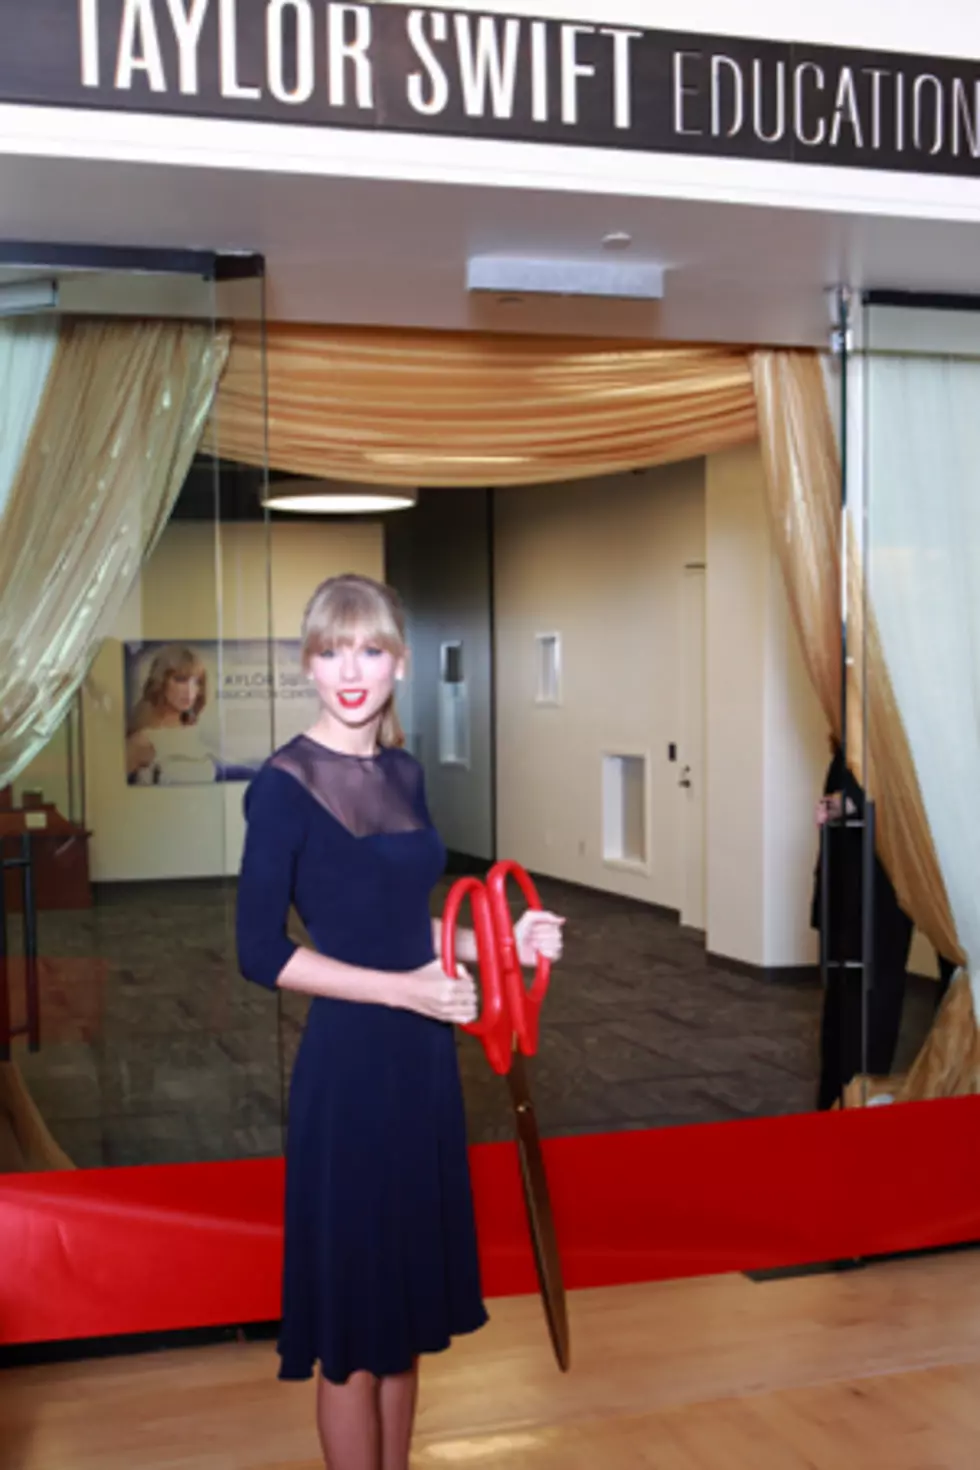 Taylor Swift Shares Details of Next Album as Education Center Opens Its Doors